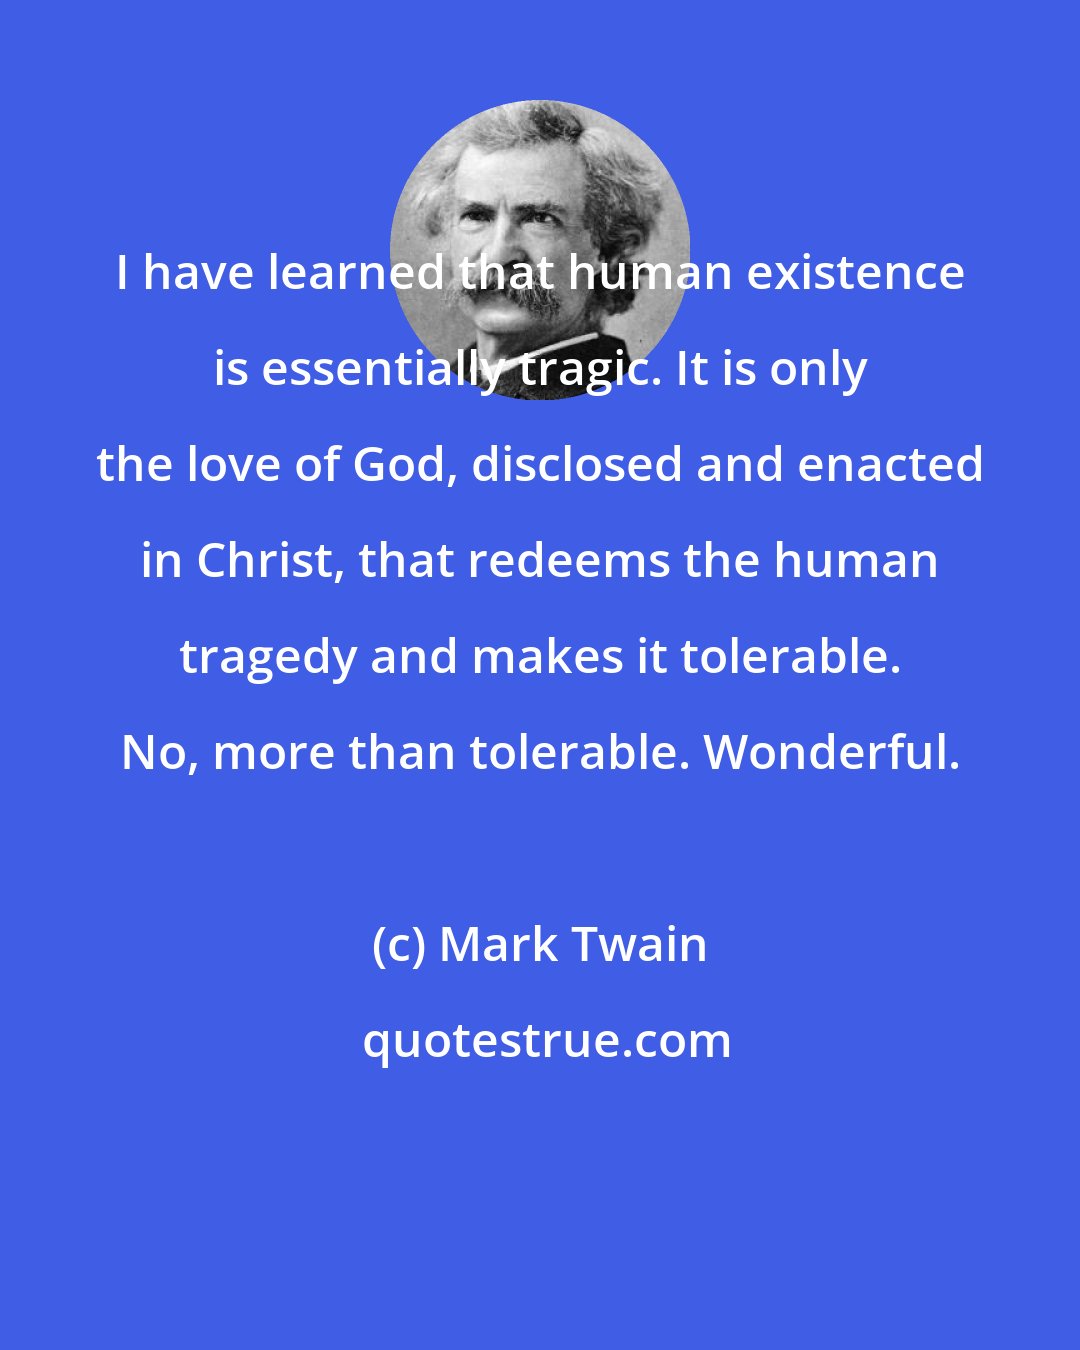 Mark Twain: I have learned that human existence is essentially tragic. It is only the love of God, disclosed and enacted in Christ, that redeems the human tragedy and makes it tolerable. No, more than tolerable. Wonderful.